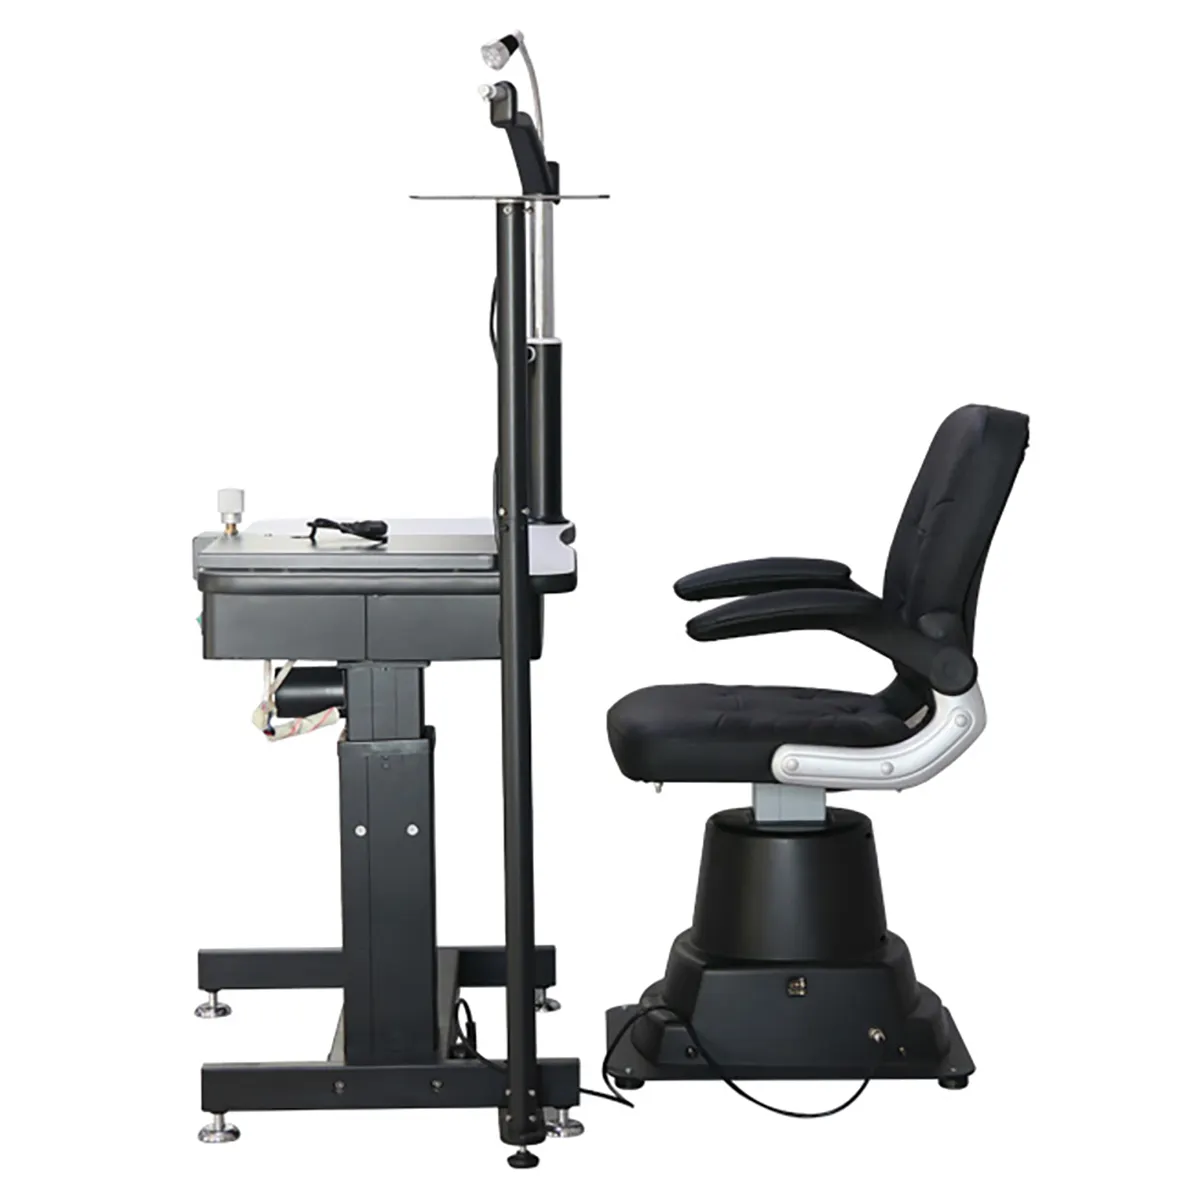 Optometry Ophthalmic Eye Refraction Unit Combination Table and Chair